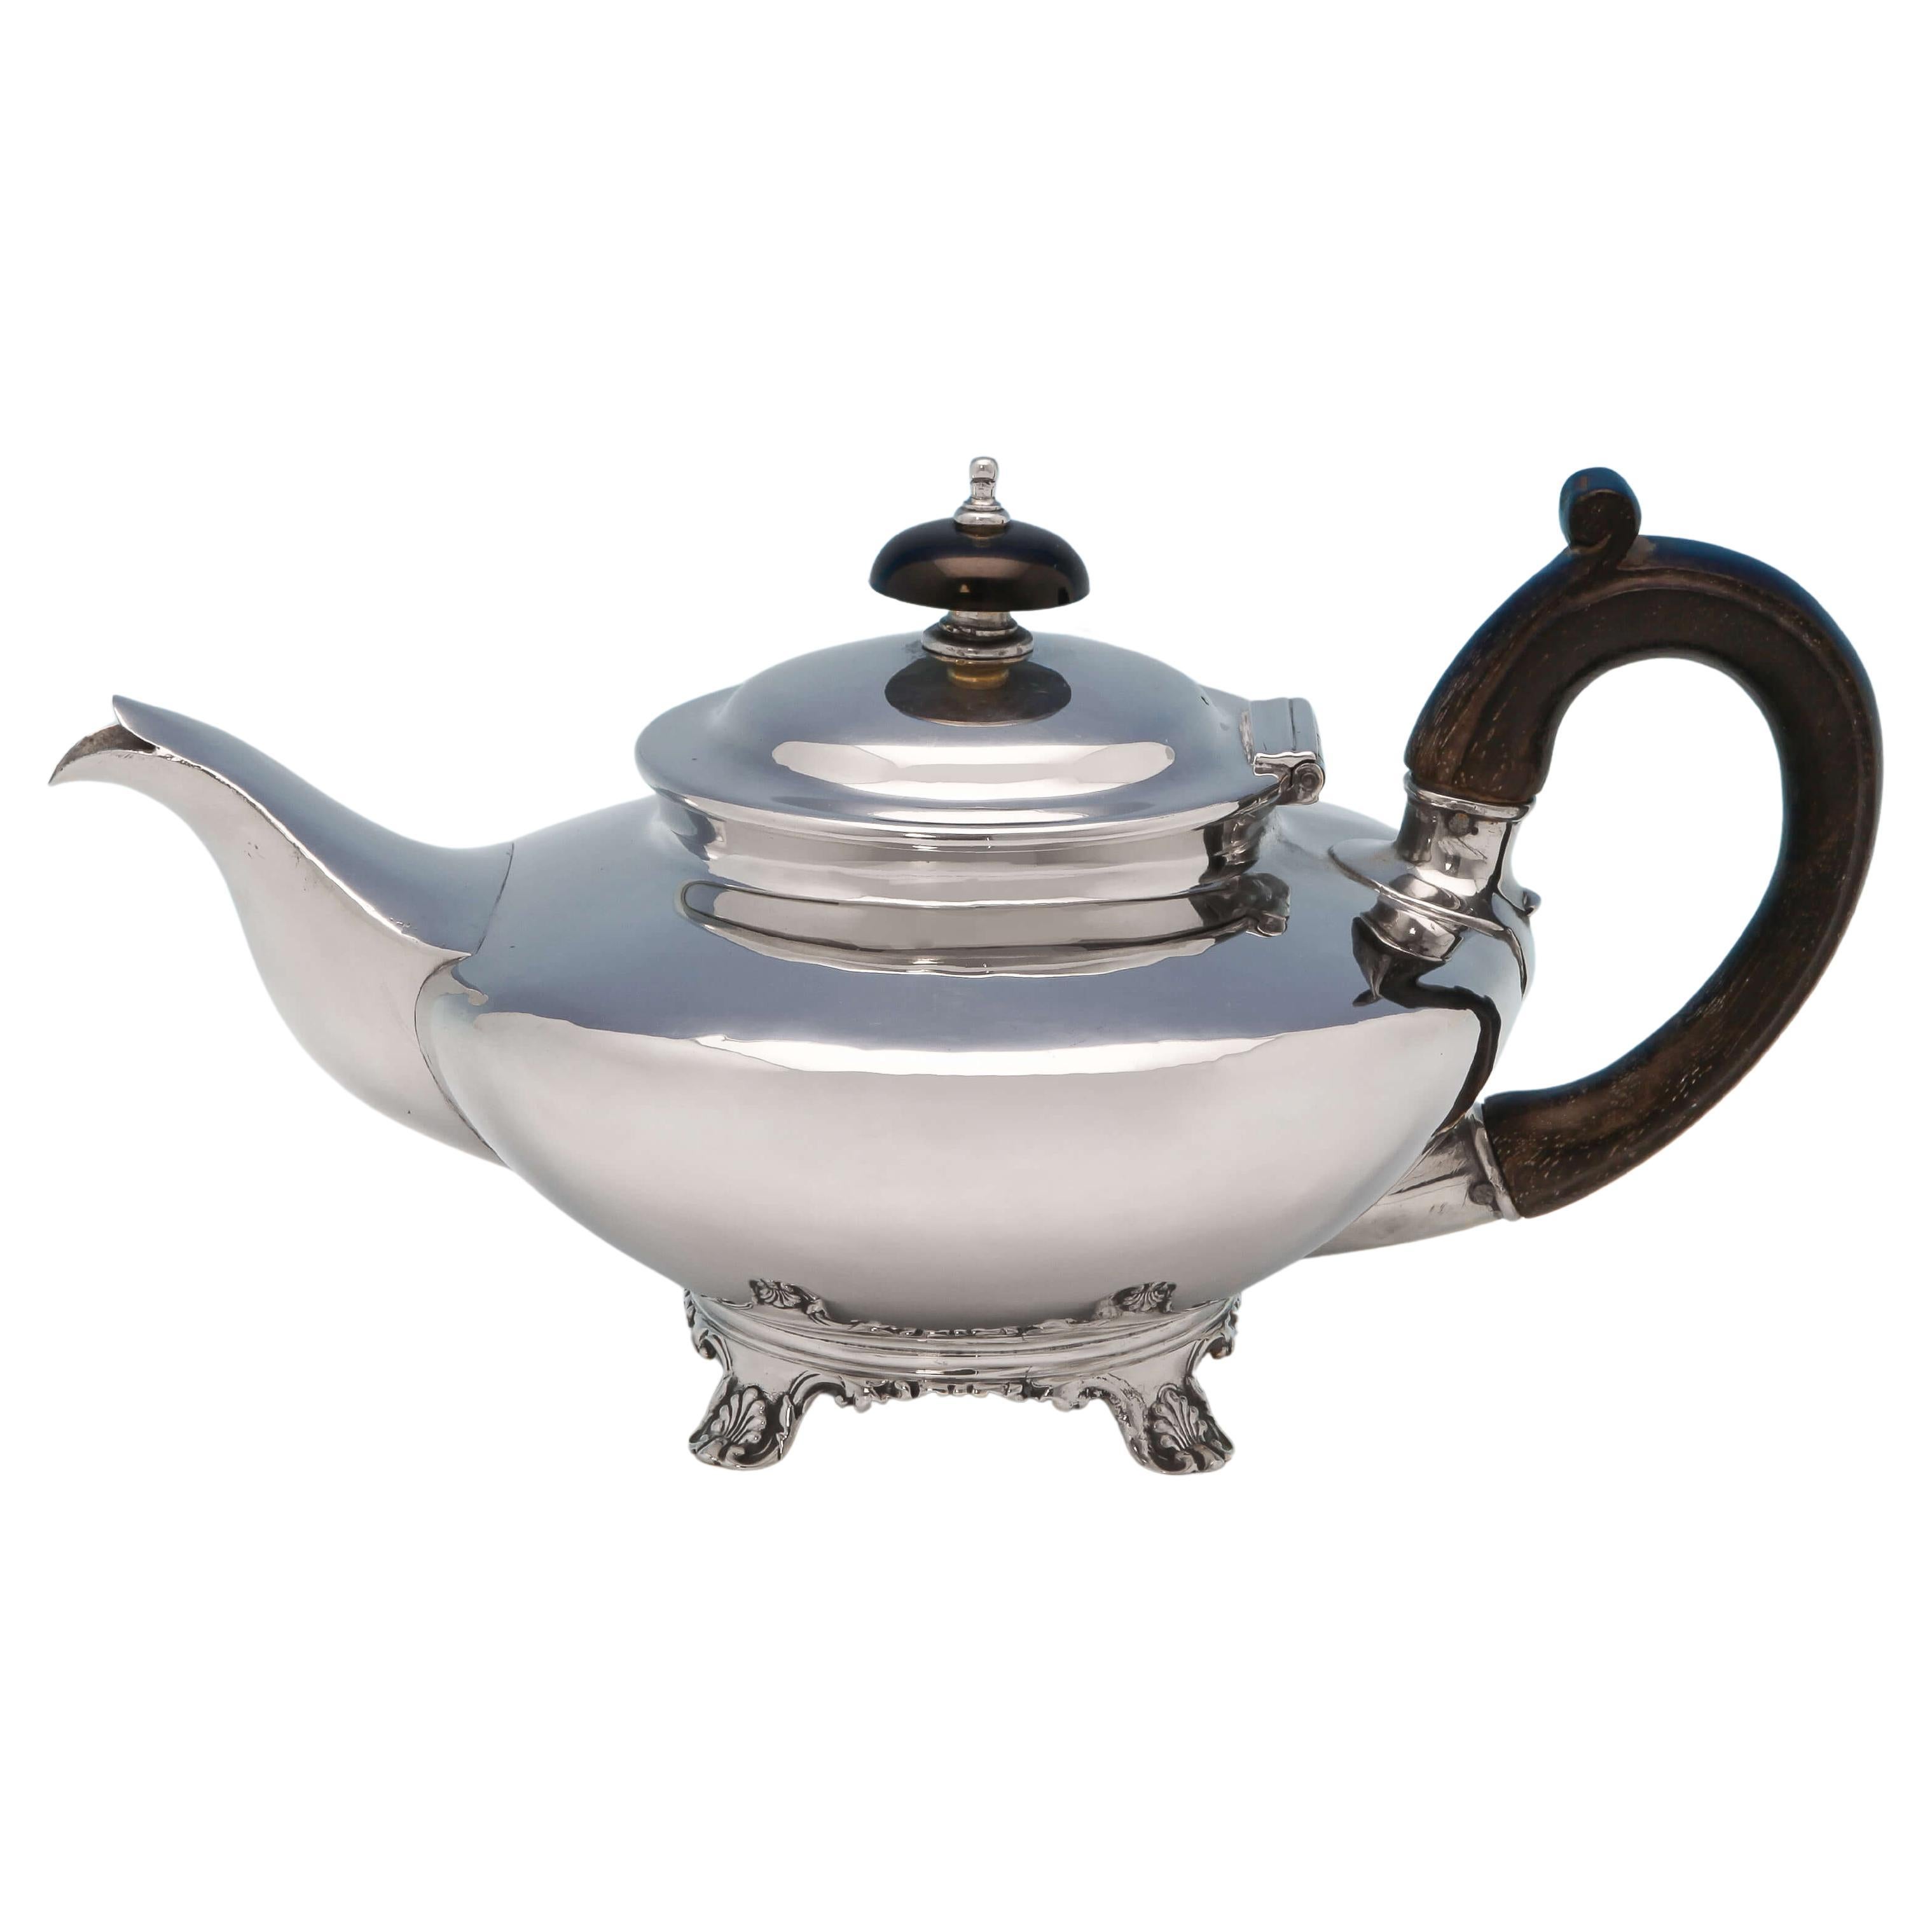 William IV period Sterling Silver Batchelor Teapot - London 1835 For Sale